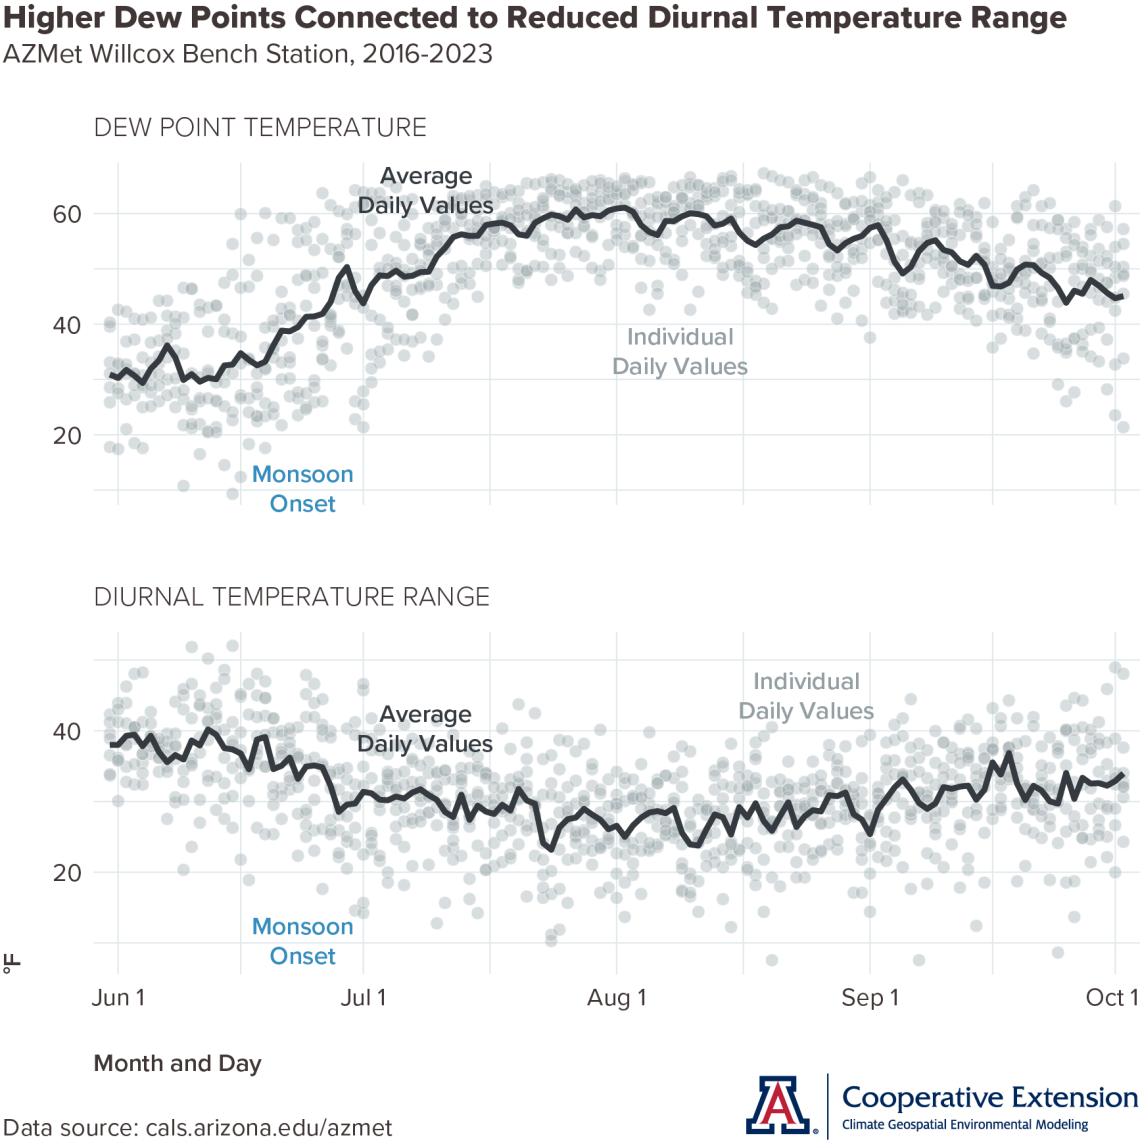 time series of dew point and diurnal temperature range from June through September at AZMet Willcox Bench station